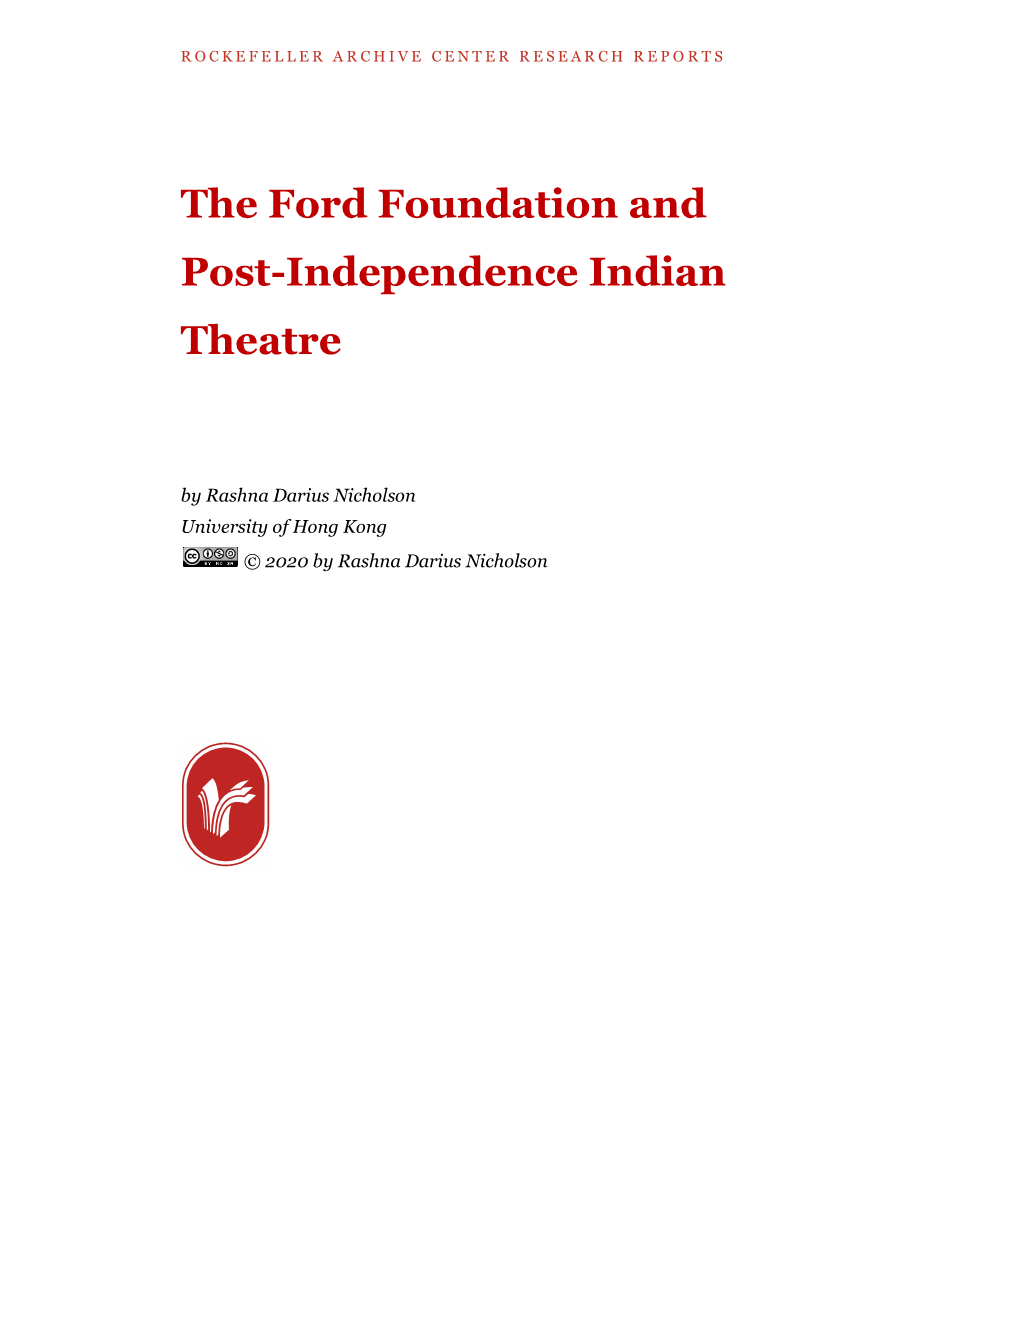 The Ford Foundation and Post-Independence Indian Theatre